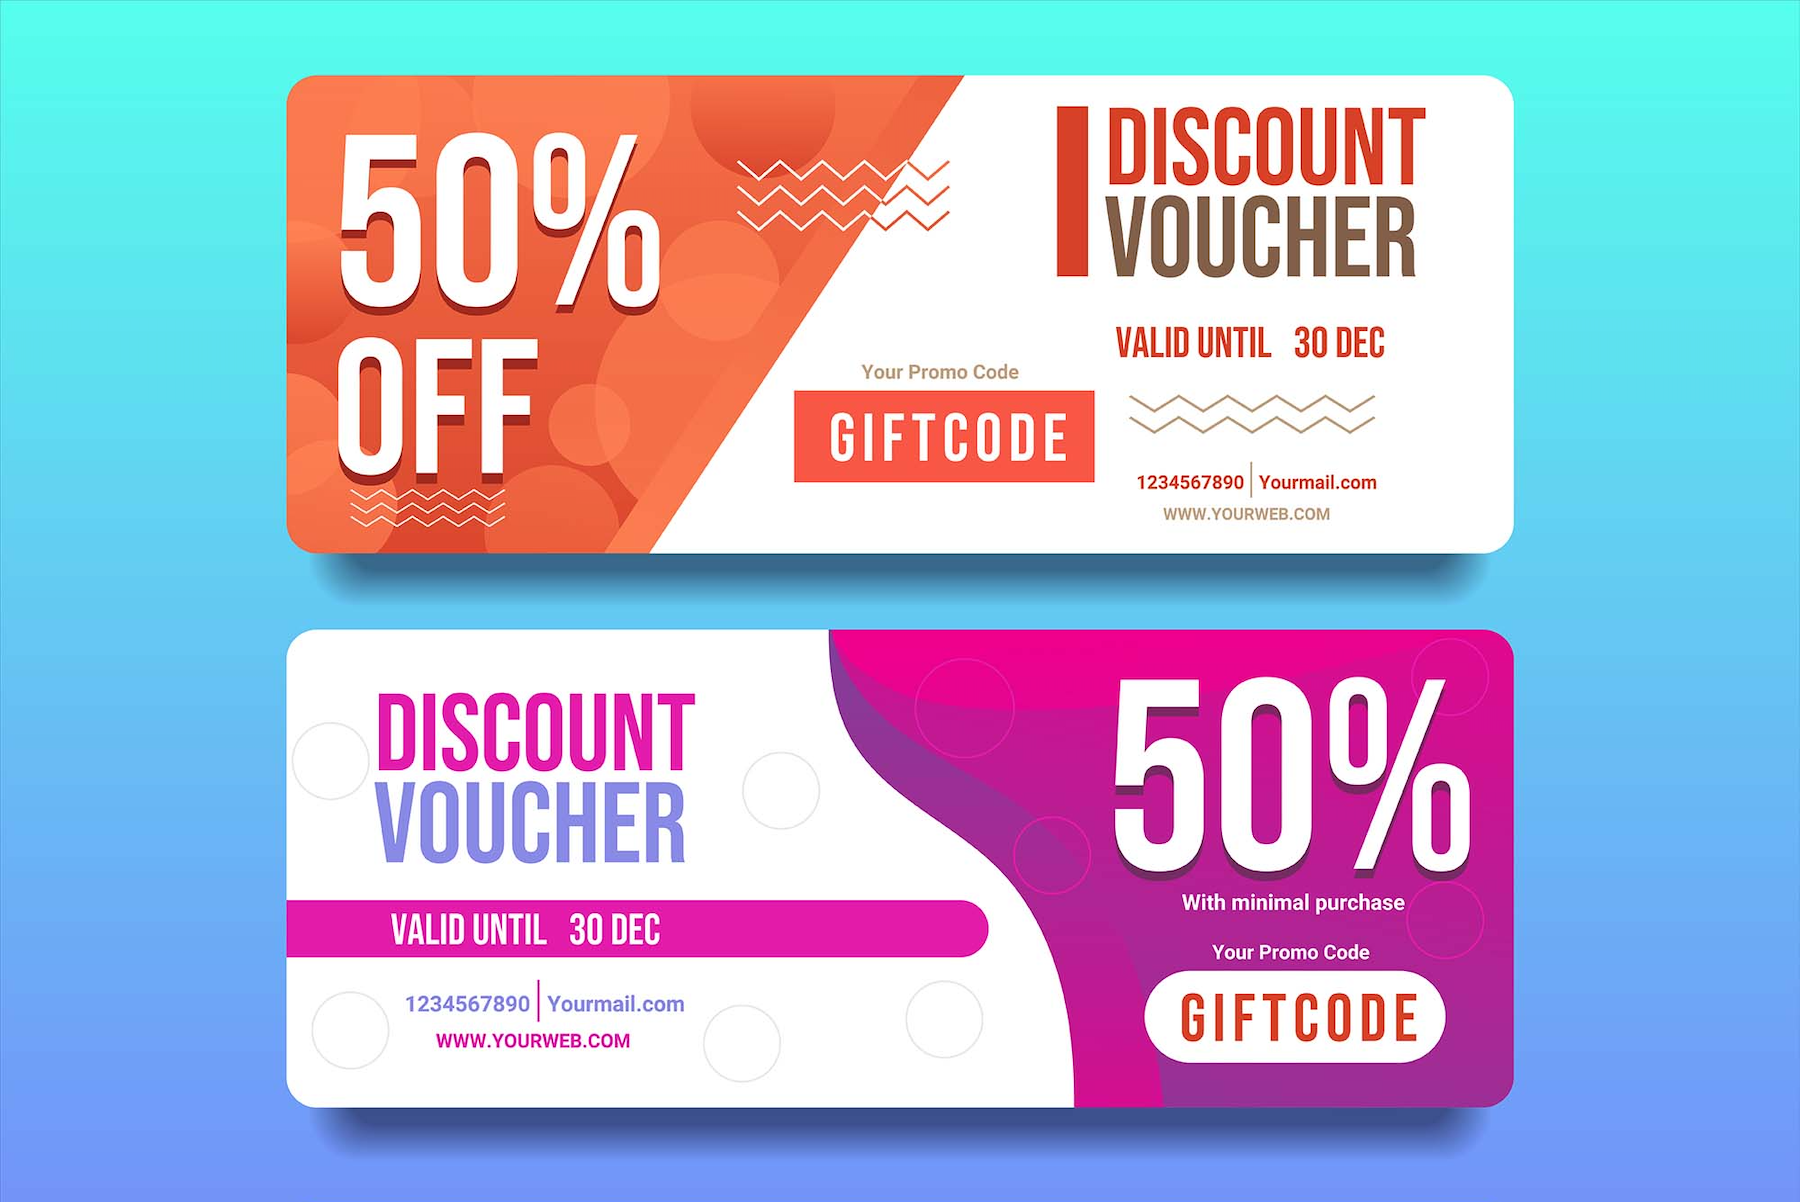 Voucher marketing can bring in new customers while enabling you to retain old ones.